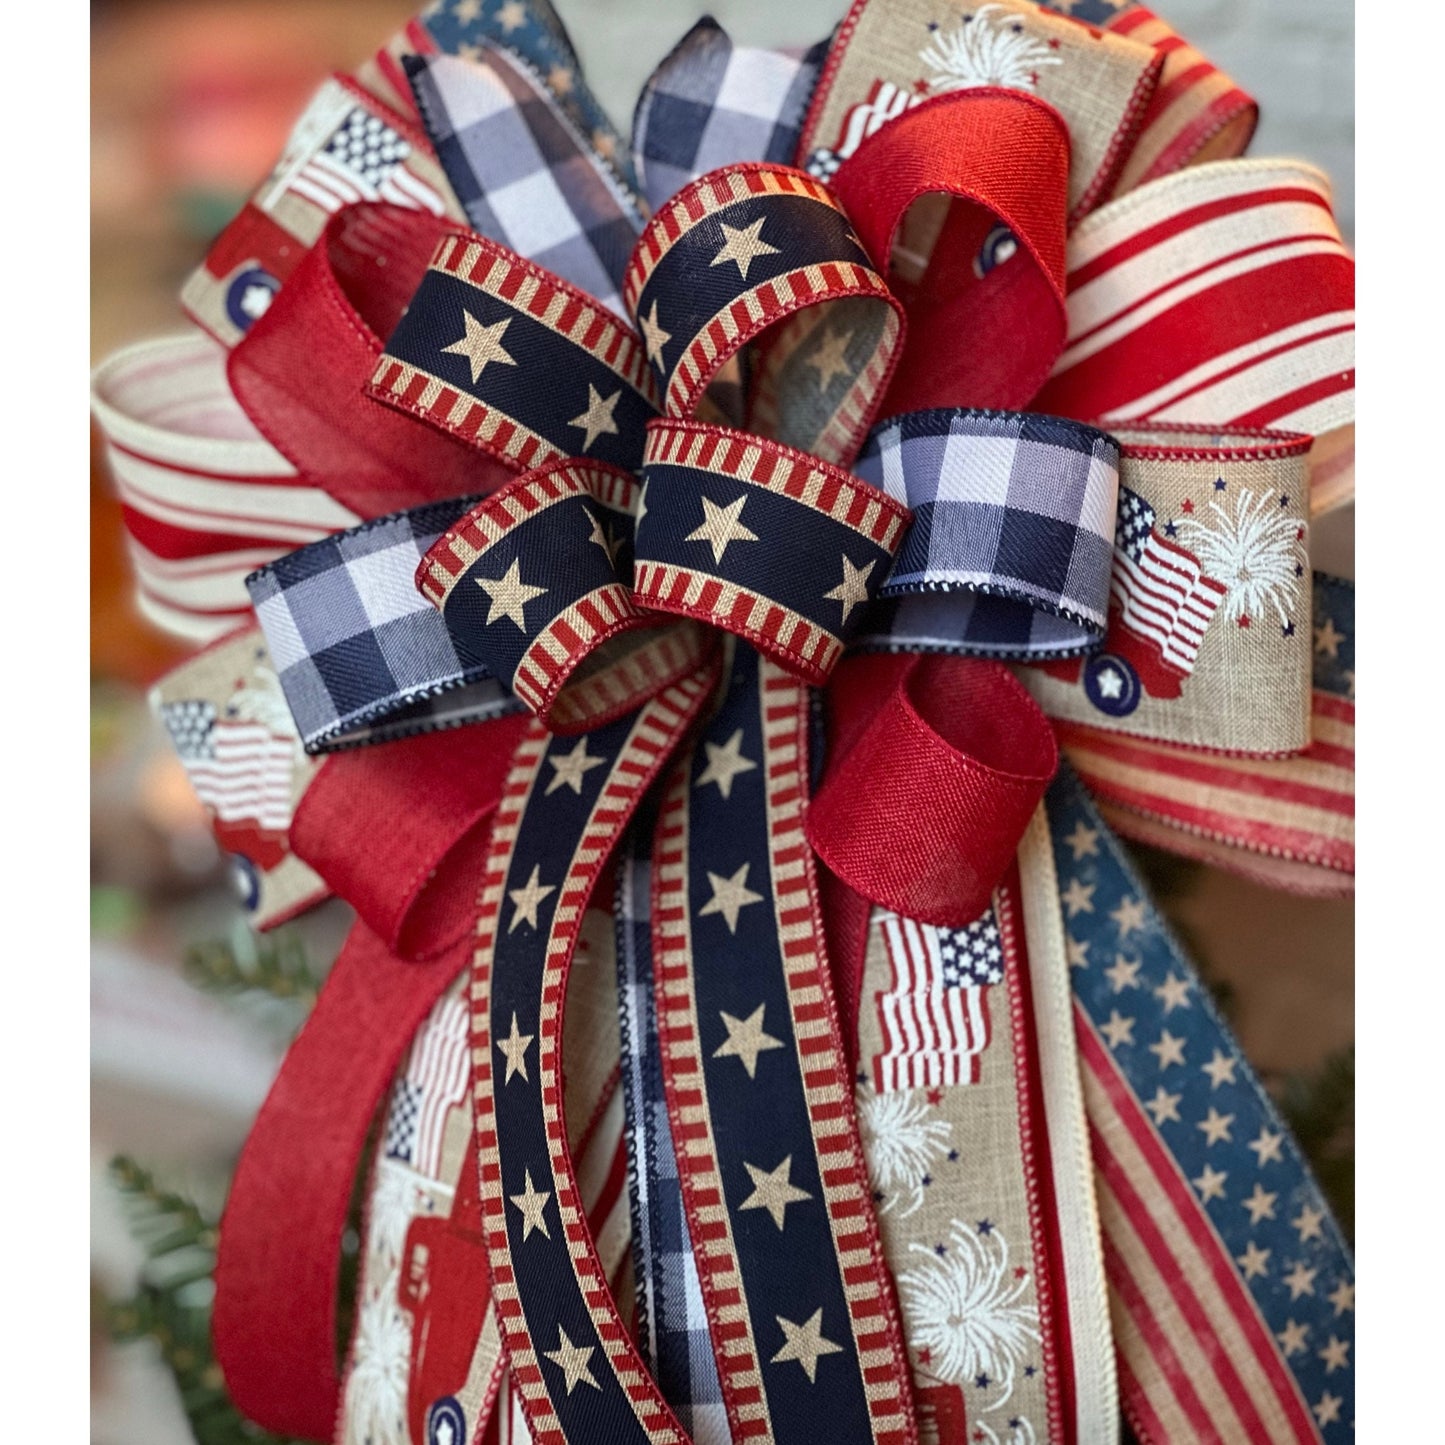 Patriotic Bow, Stars and Stripes Wreath Bow, Red White and Blue bow, Fourth of July Decor, Patriotic Decor, Independence Day Decor